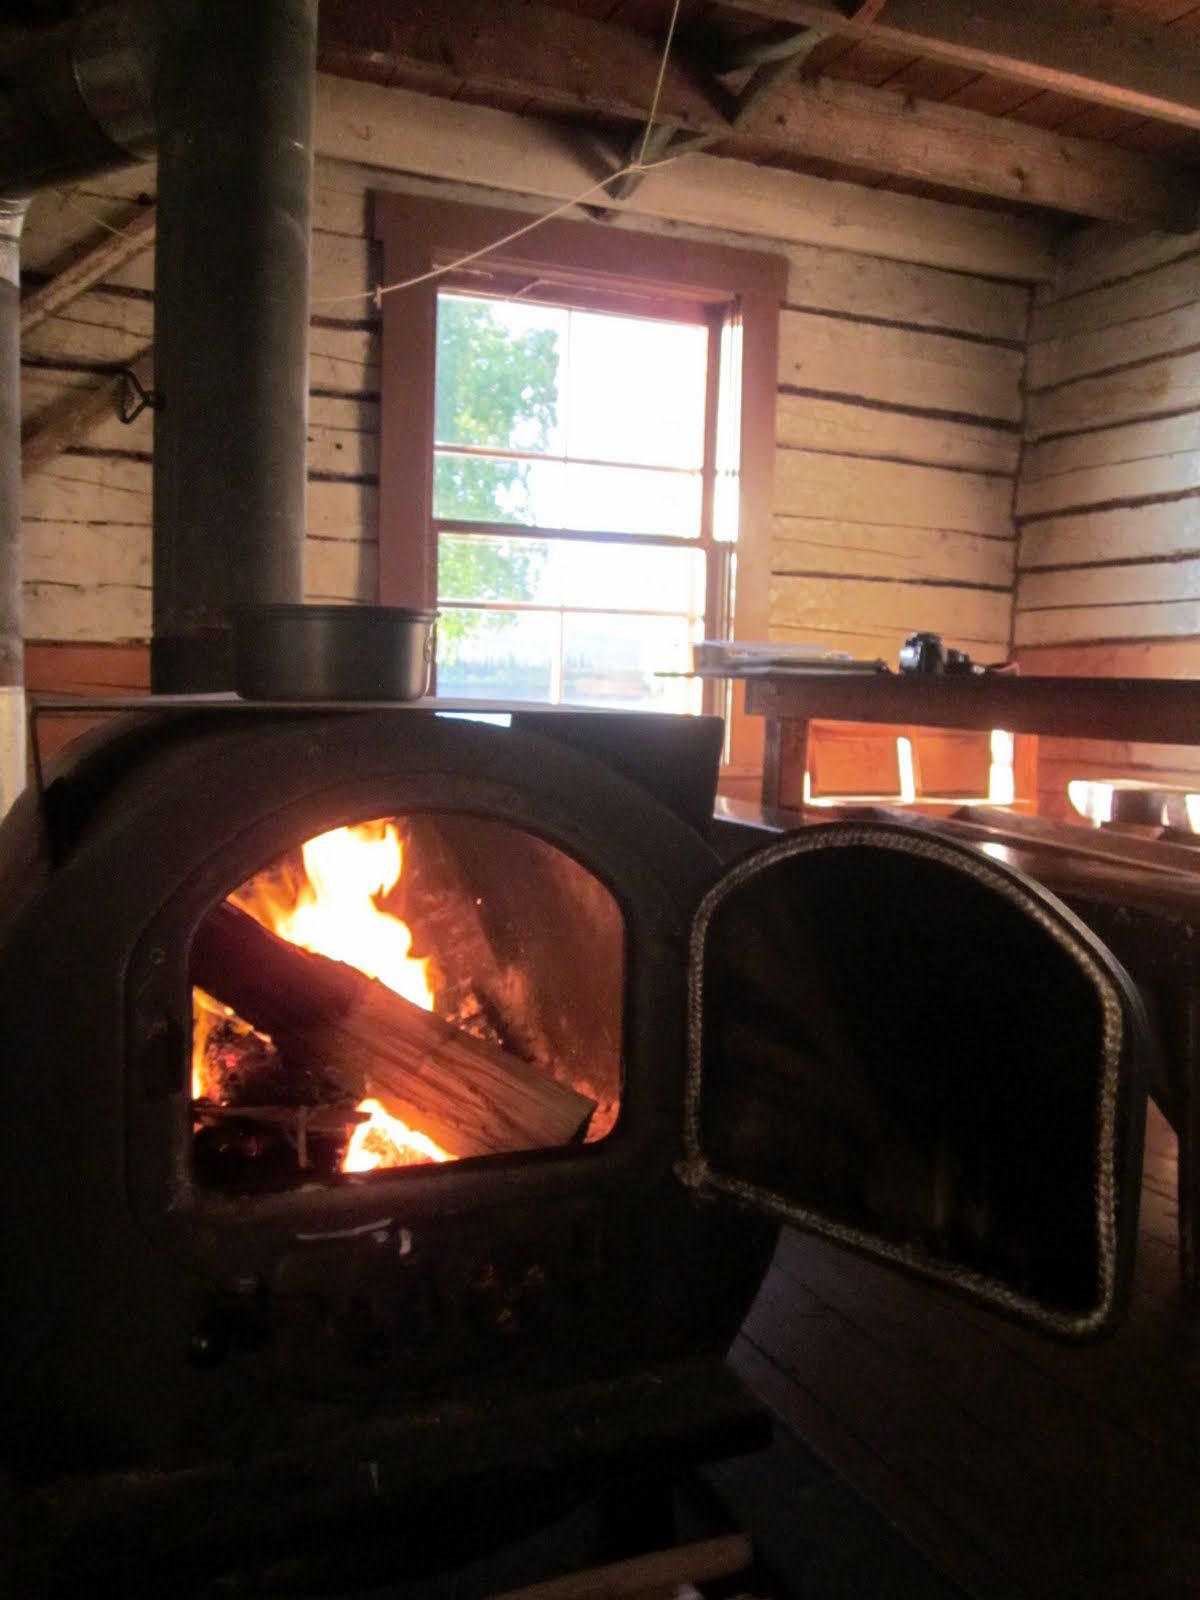 Gas Fireplace Insulation Best Of Awesome Wood Stove to Keep the Cabin Warm